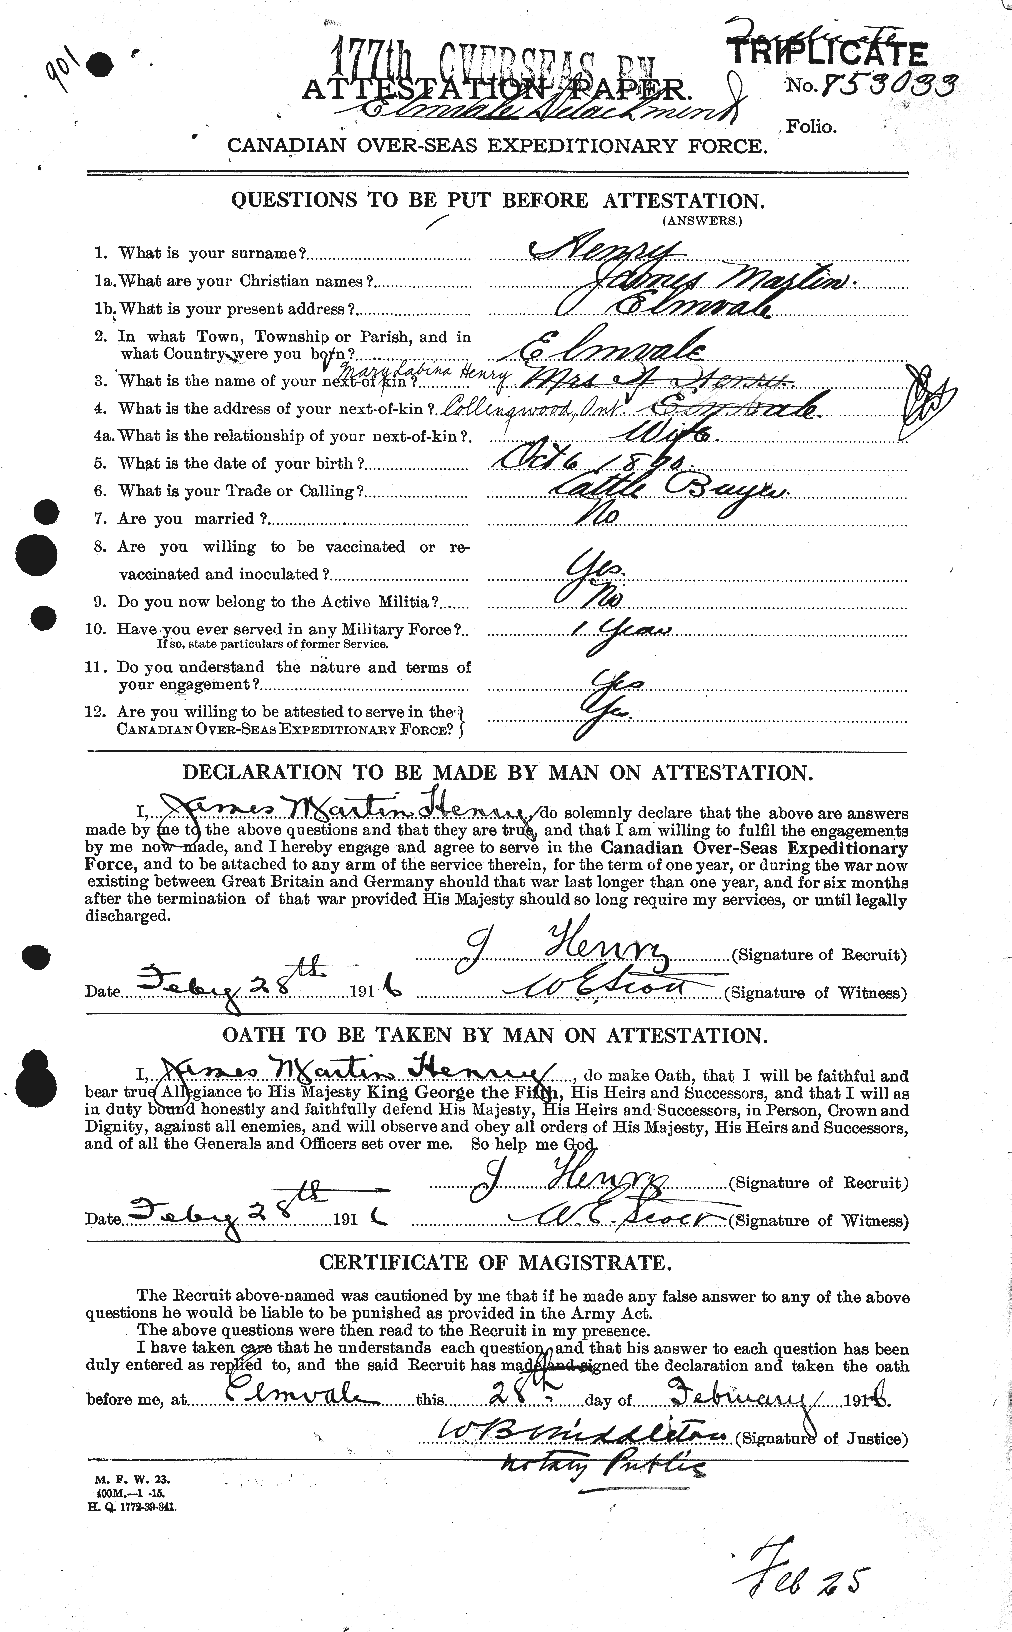 Personnel Records of the First World War - CEF 387598a